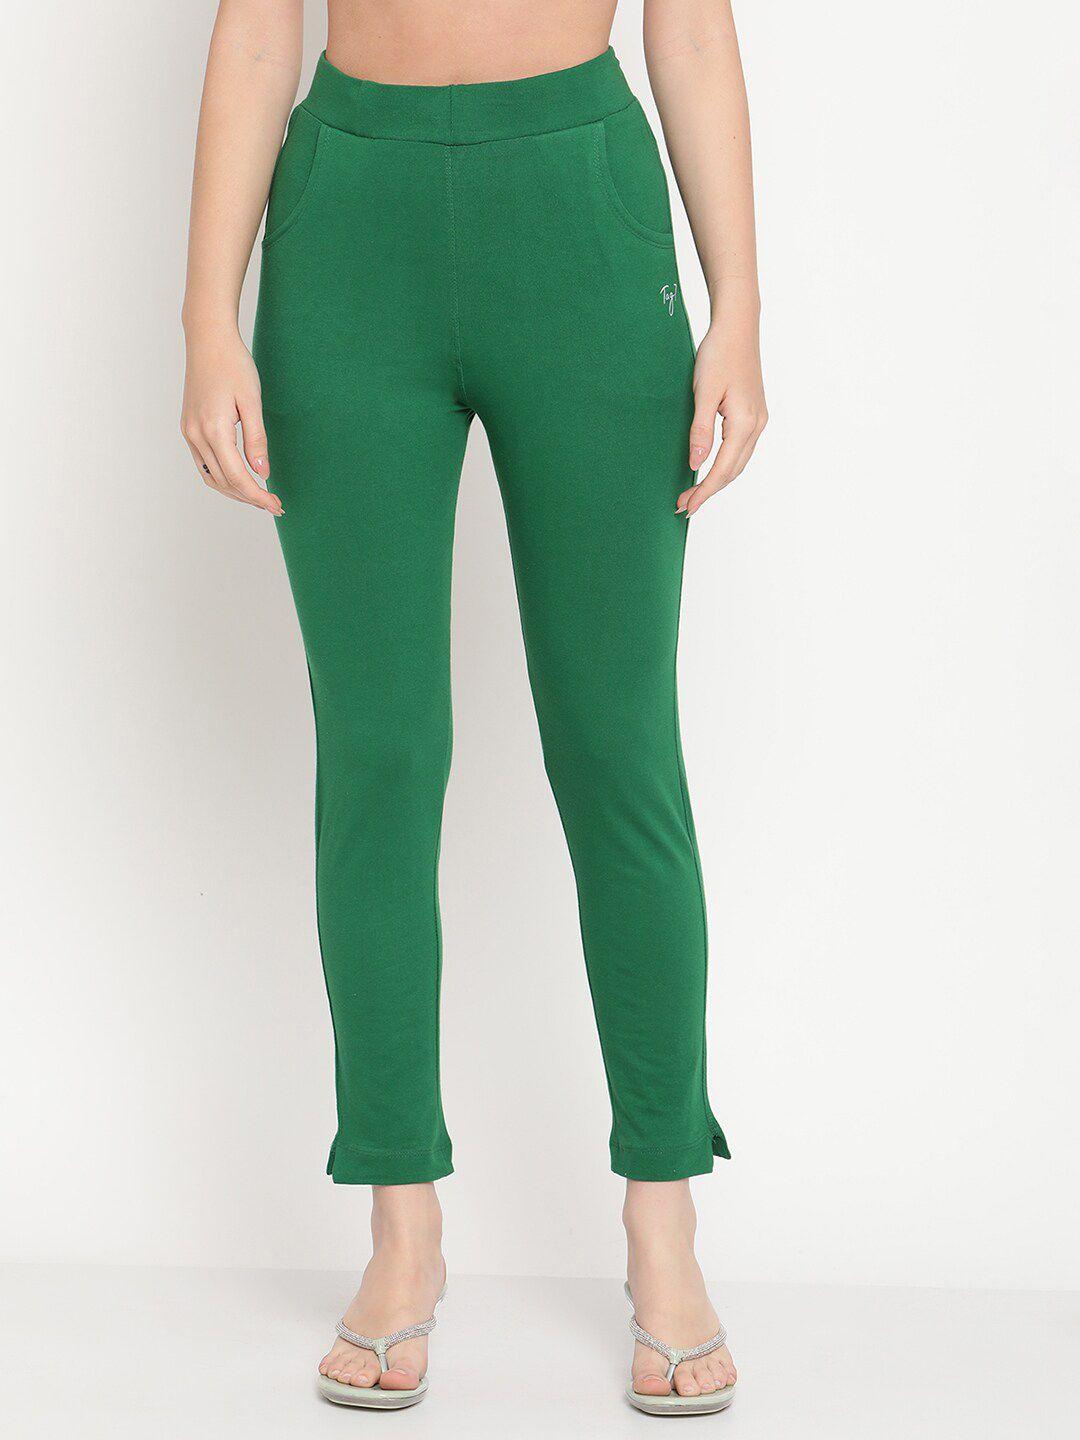 tag 7 women green solid jeggings